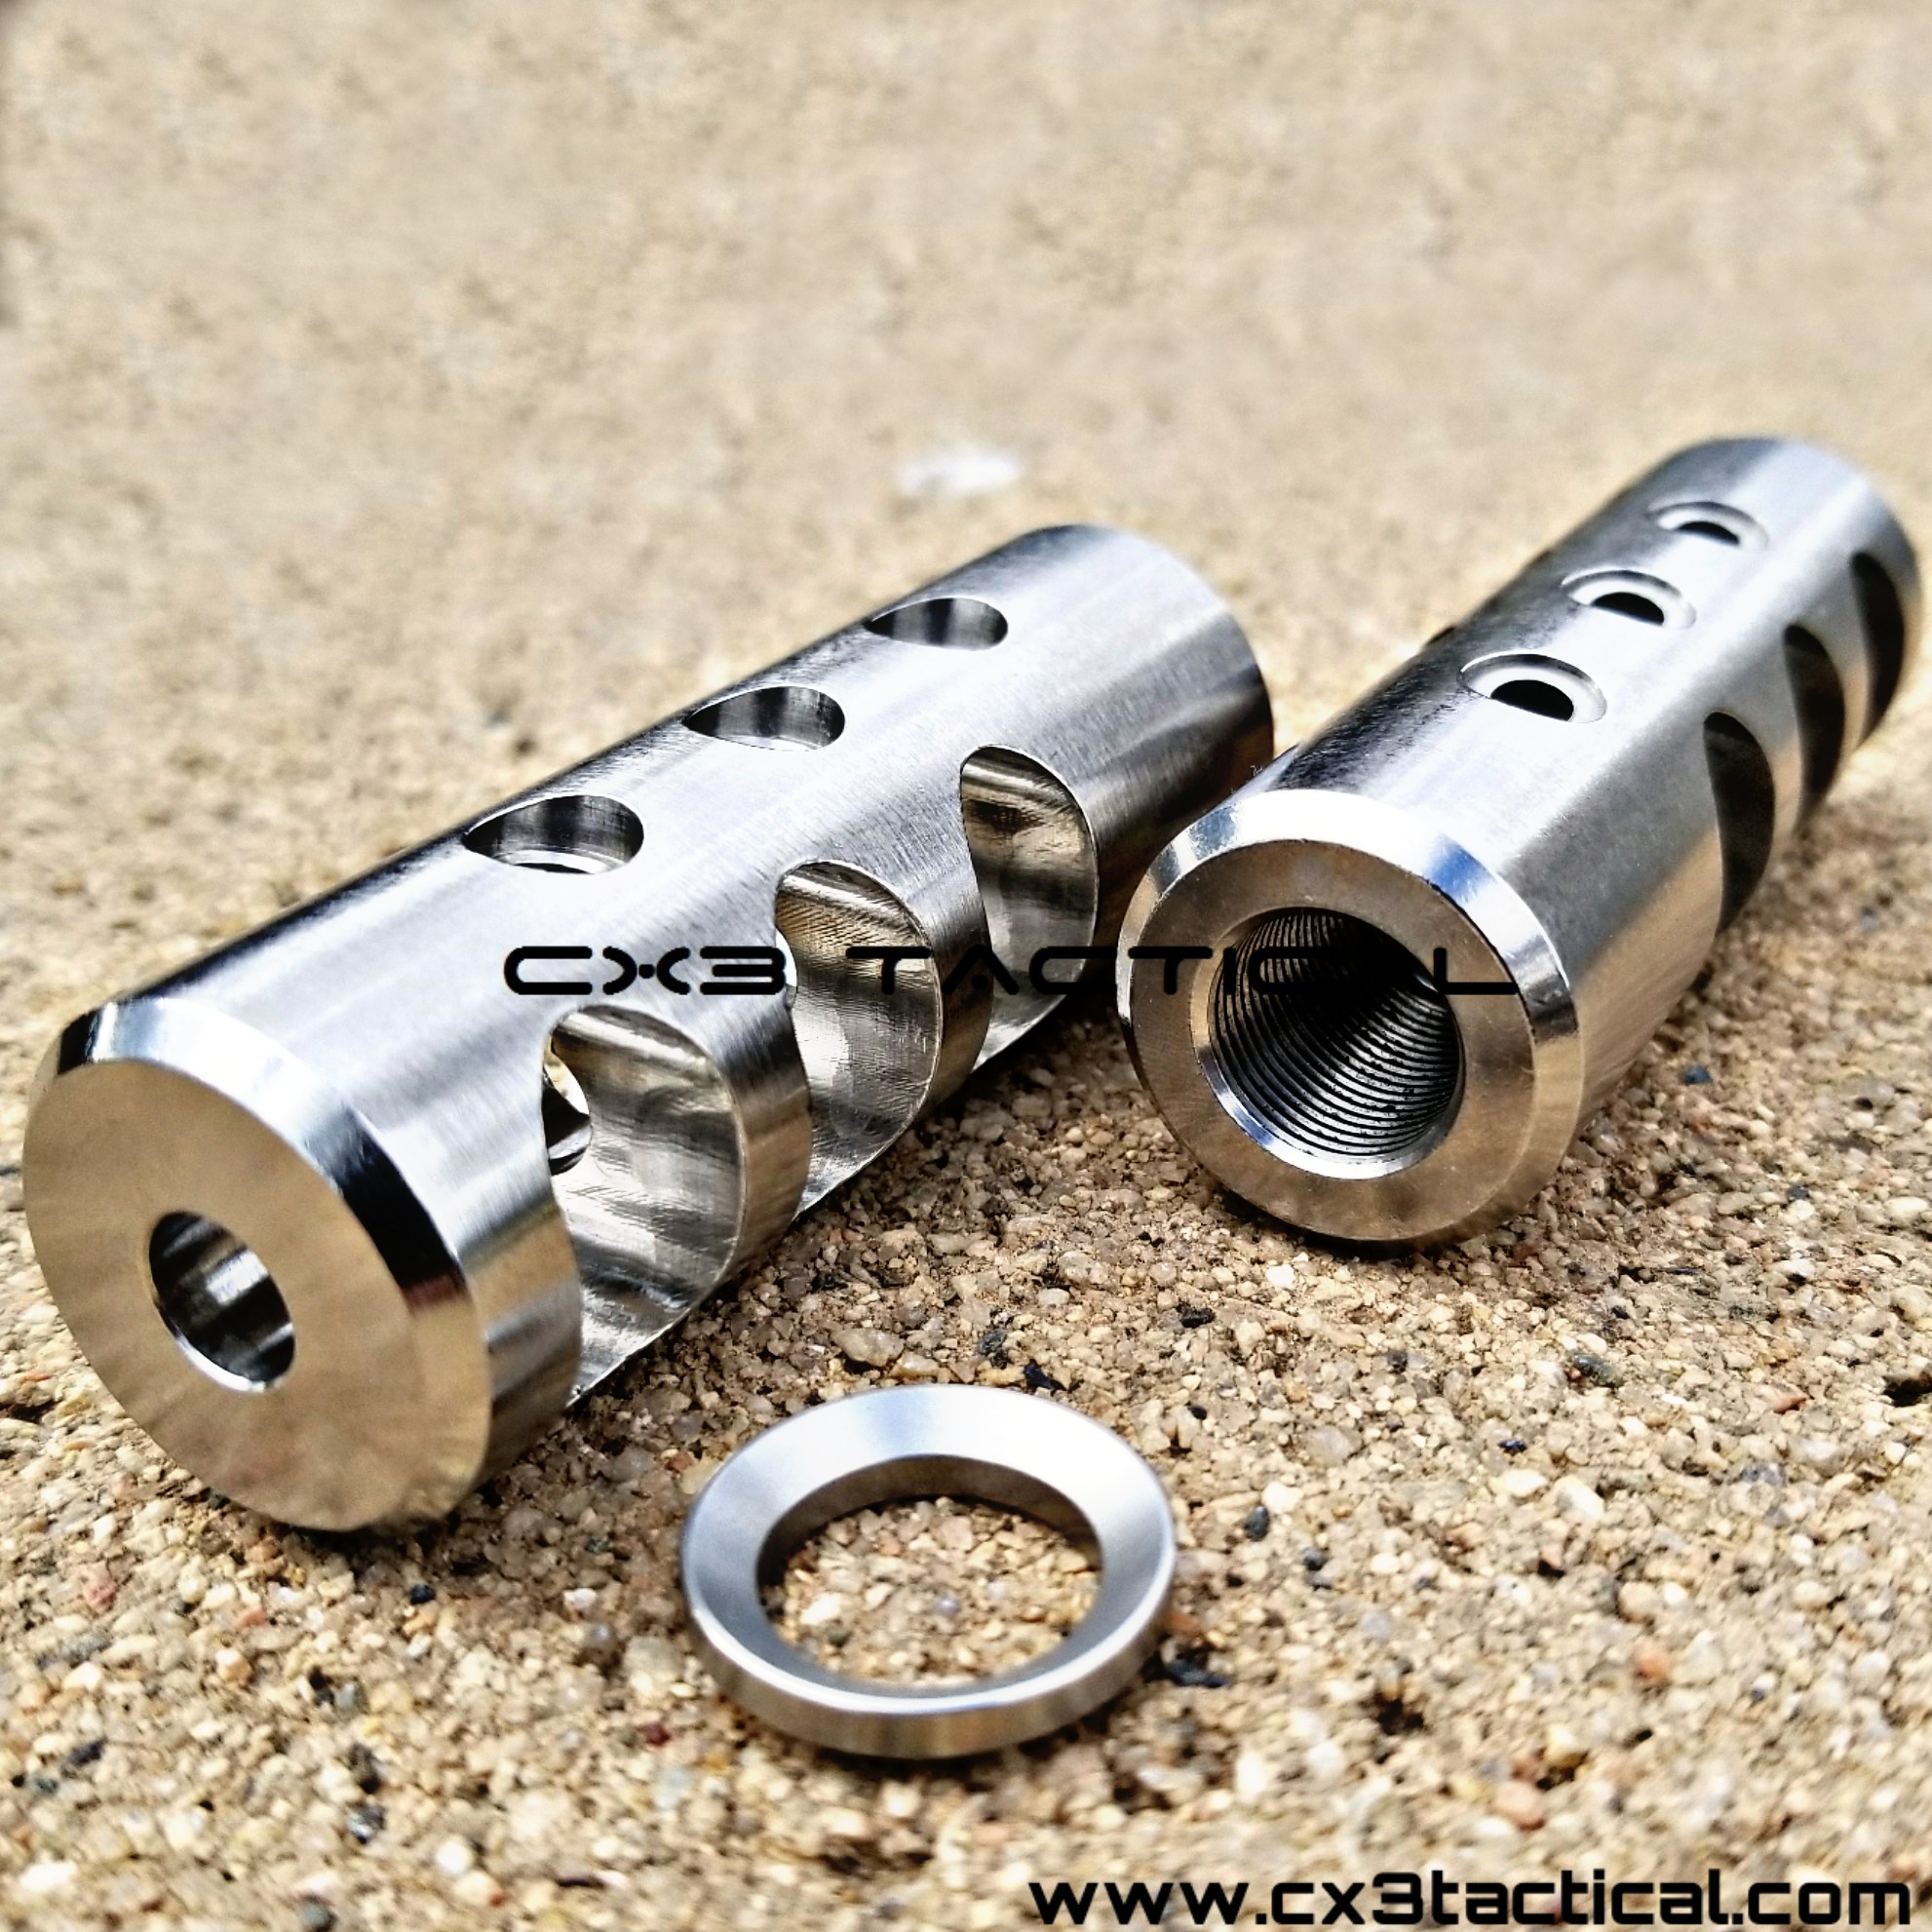 Stainless Steel 1/2x28 Thread 223 5.56 Competition Muzzle Brake W Crush Washer 